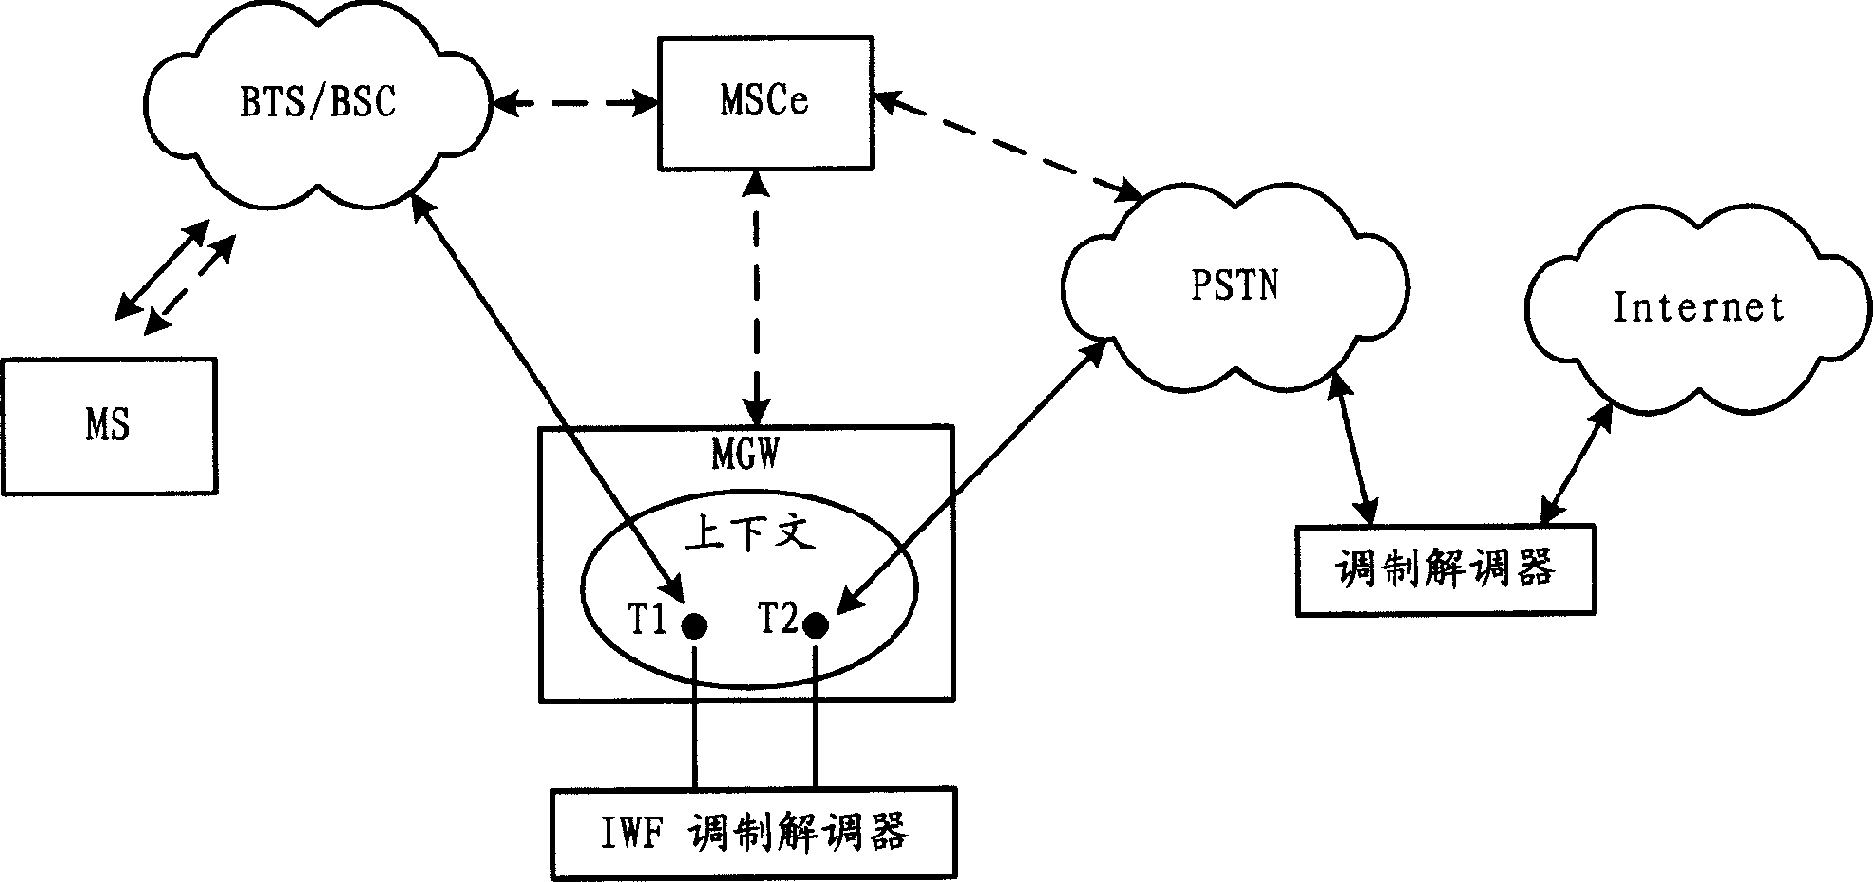 Service switching method in 3G mobile communication system